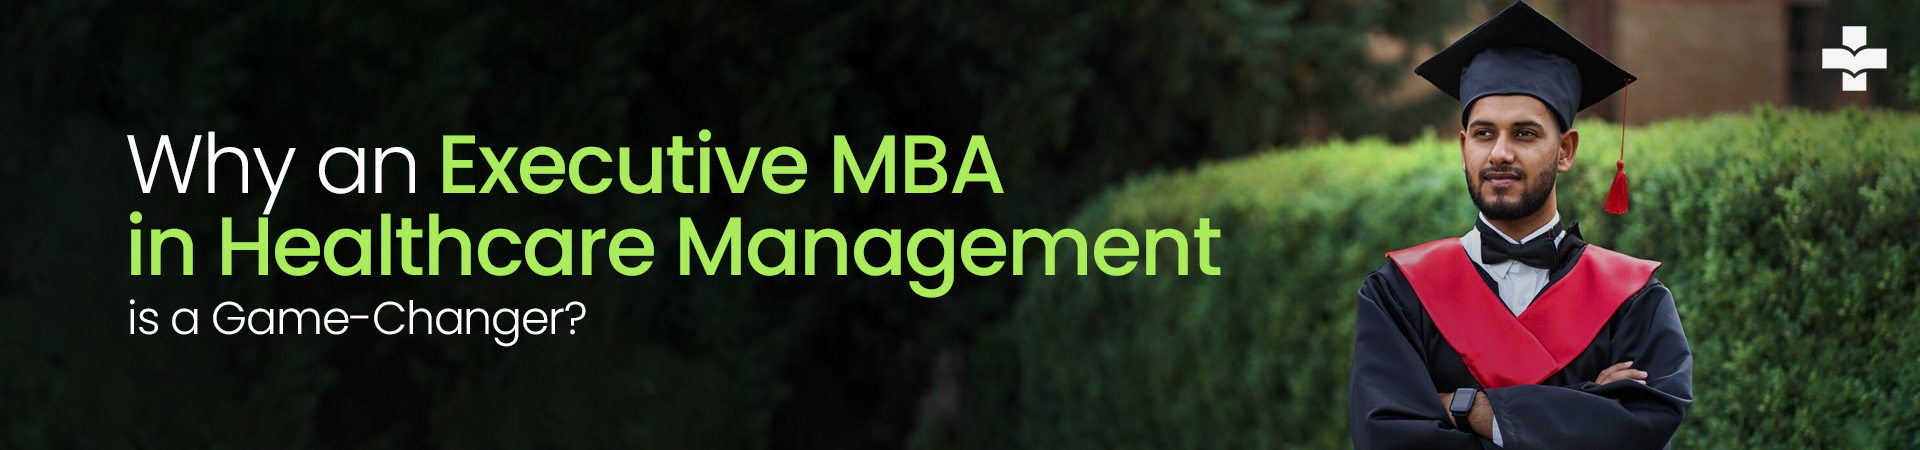 Executive MBA in Healthcare Management program by medvarsity